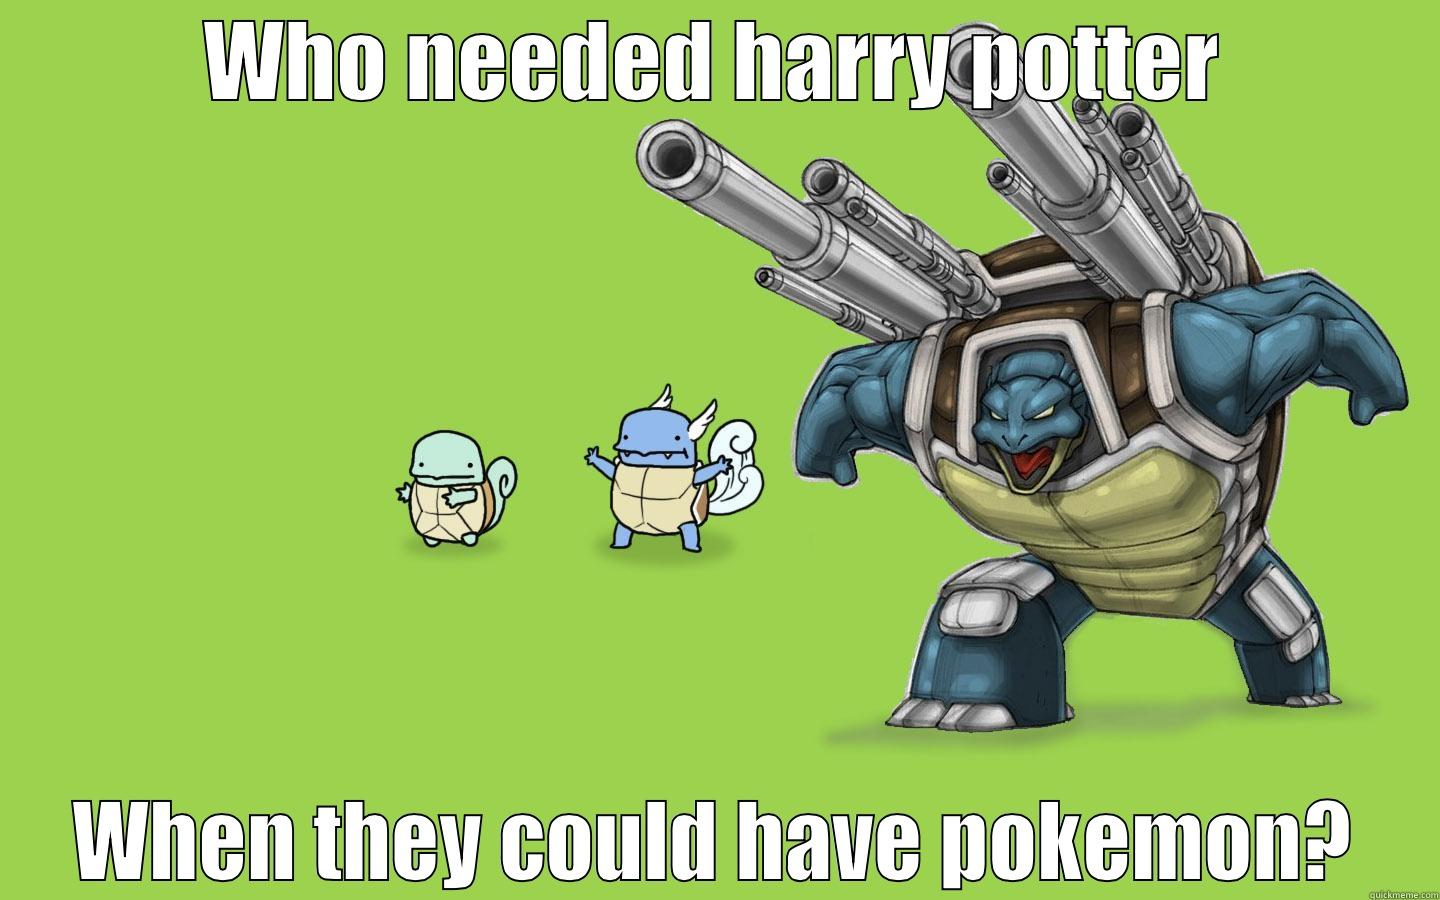 WHO NEEDED HARRY POTTER WHEN THEY COULD HAVE POKEMON? Misc